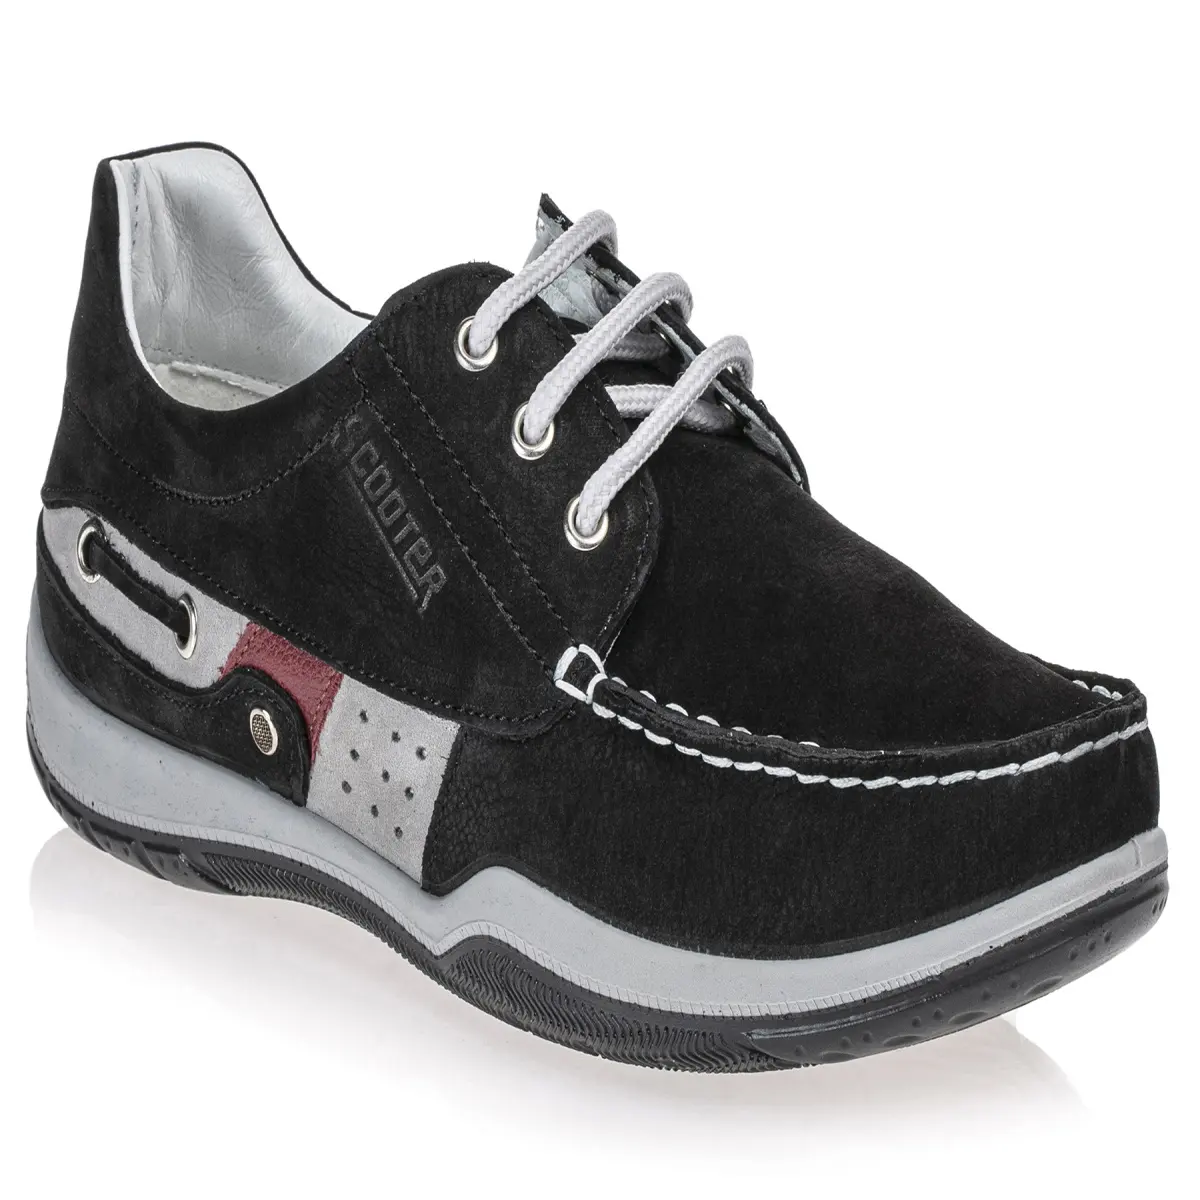 Scooter Men Genuine Nubuck Leather Comfortable and Lace-Up Black Casual Oxford Shoes M2020NS